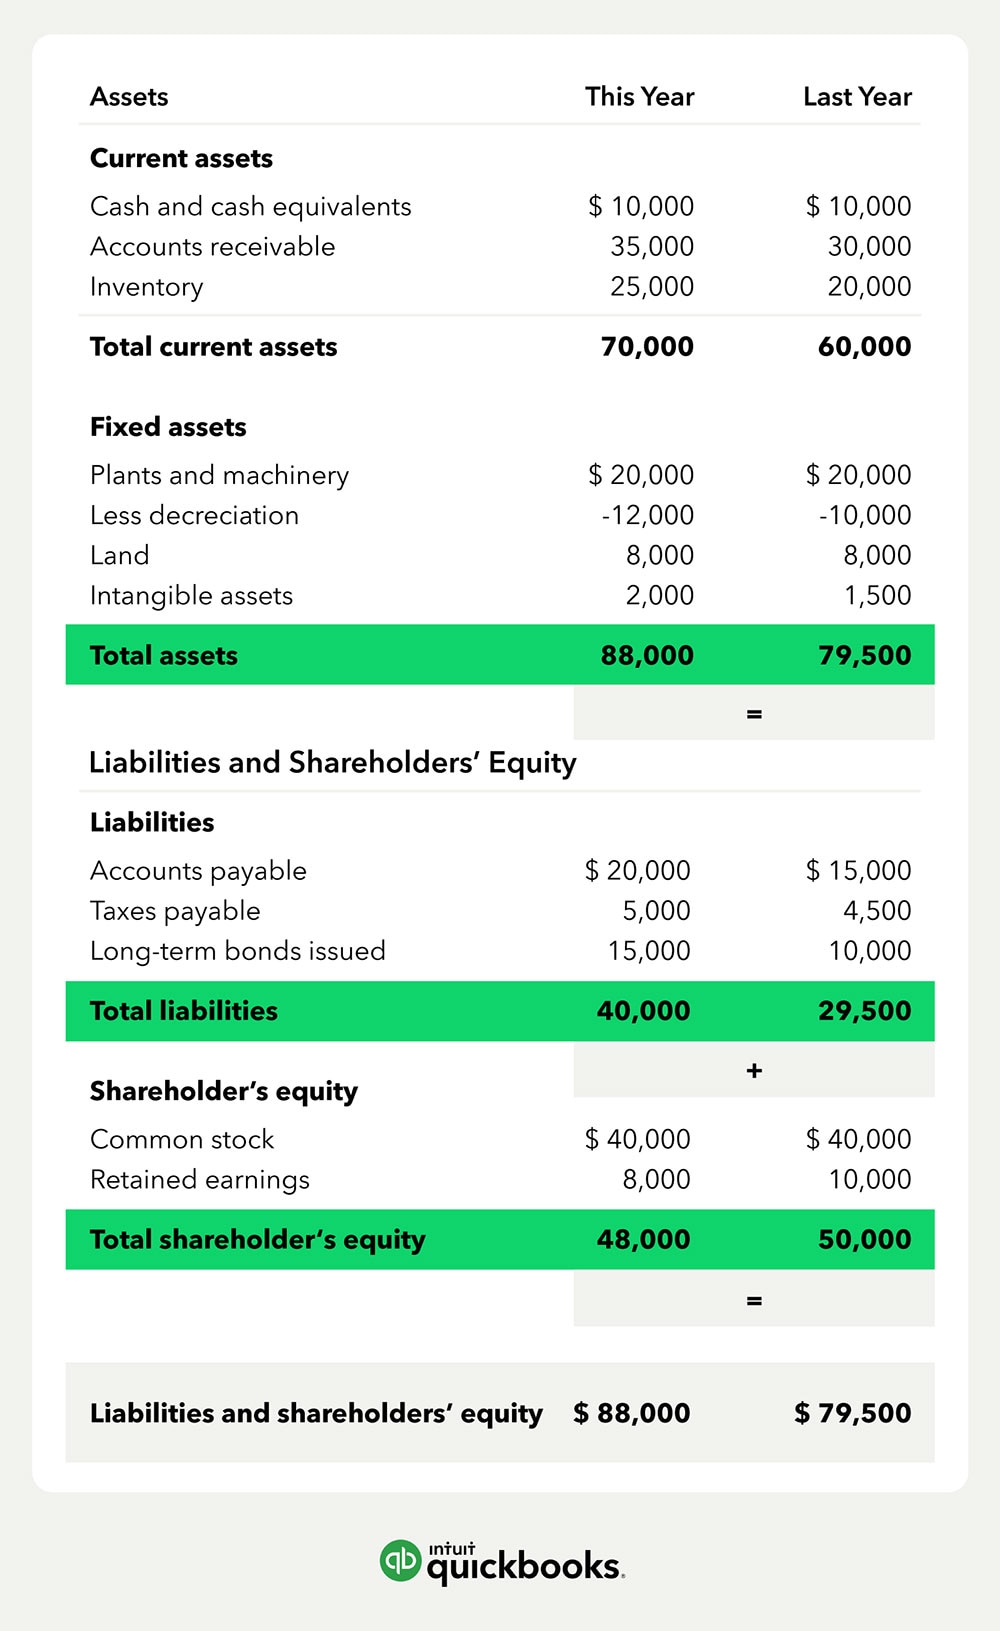 Highlighting the equation for the balance sheet combining liabilities and shareholder equity to balance assets.